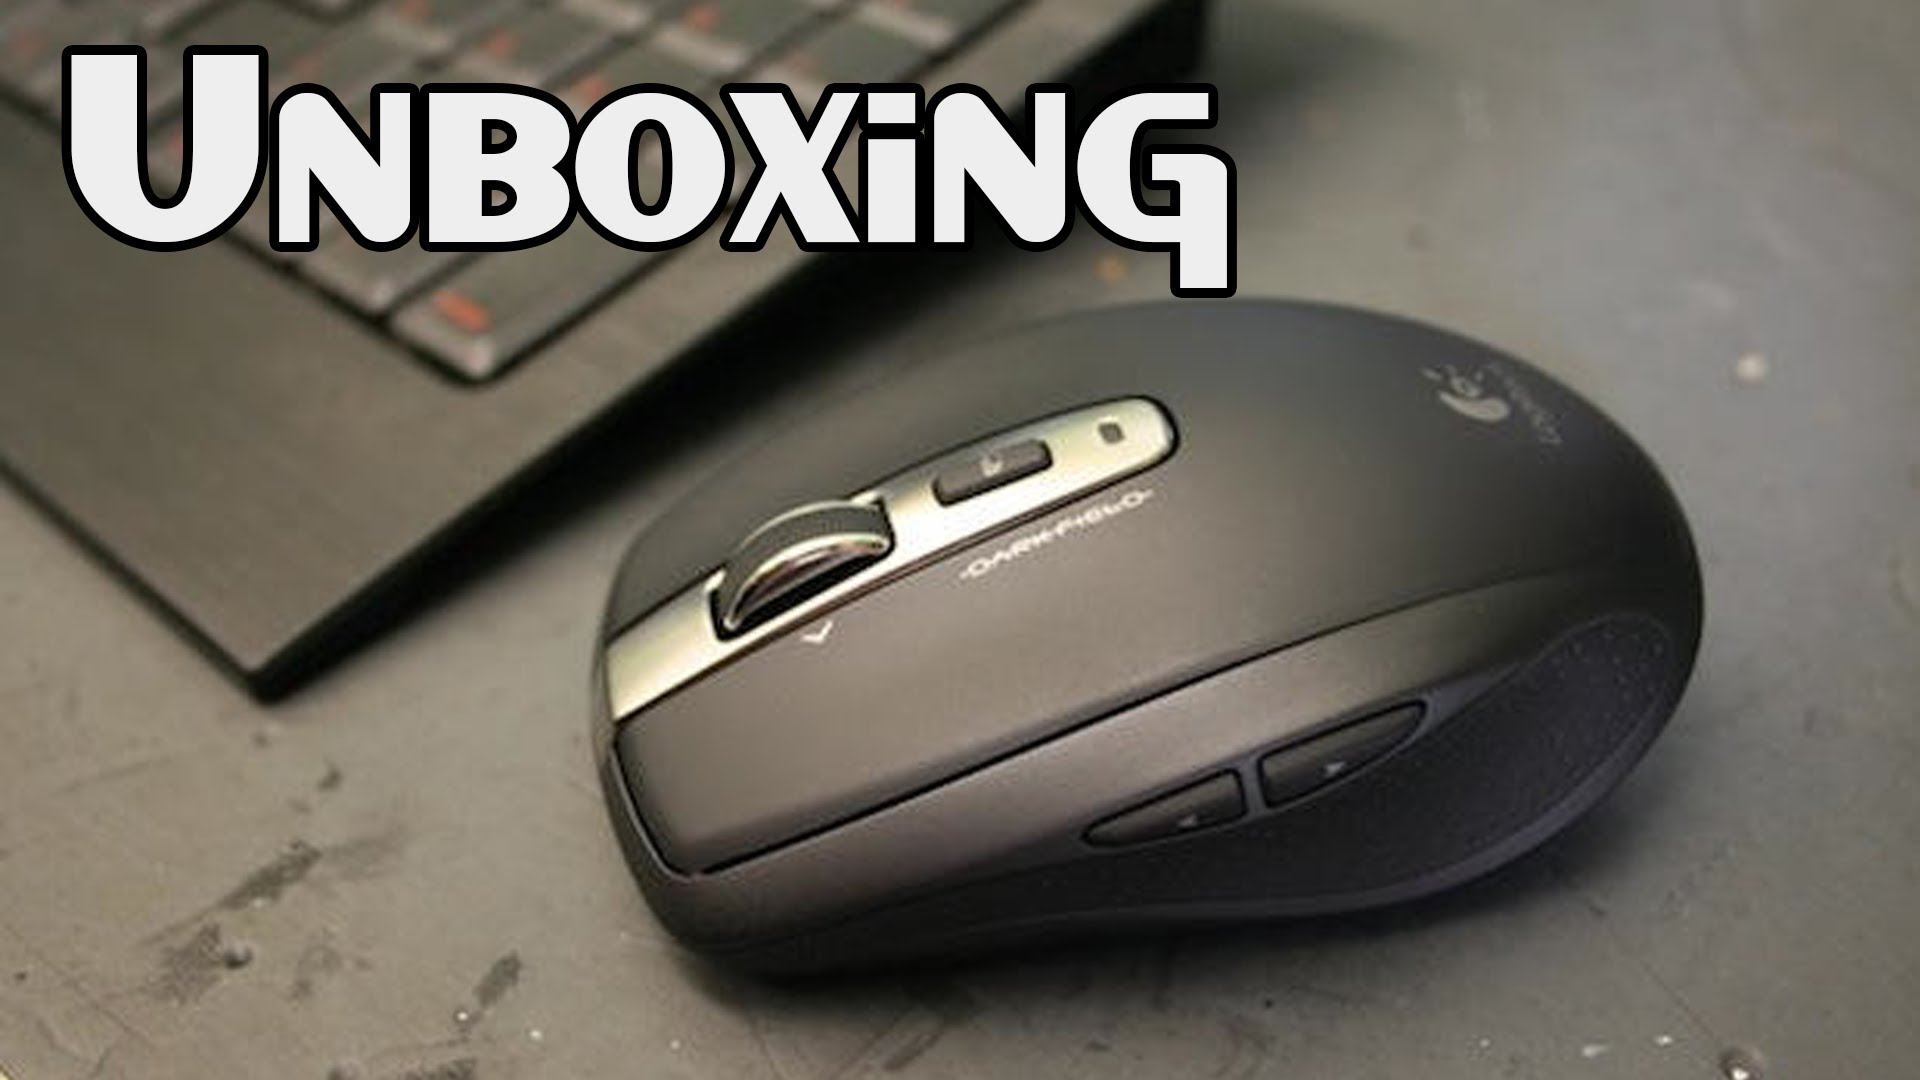 Unboxing: Logitech Anywhere Mouse MX